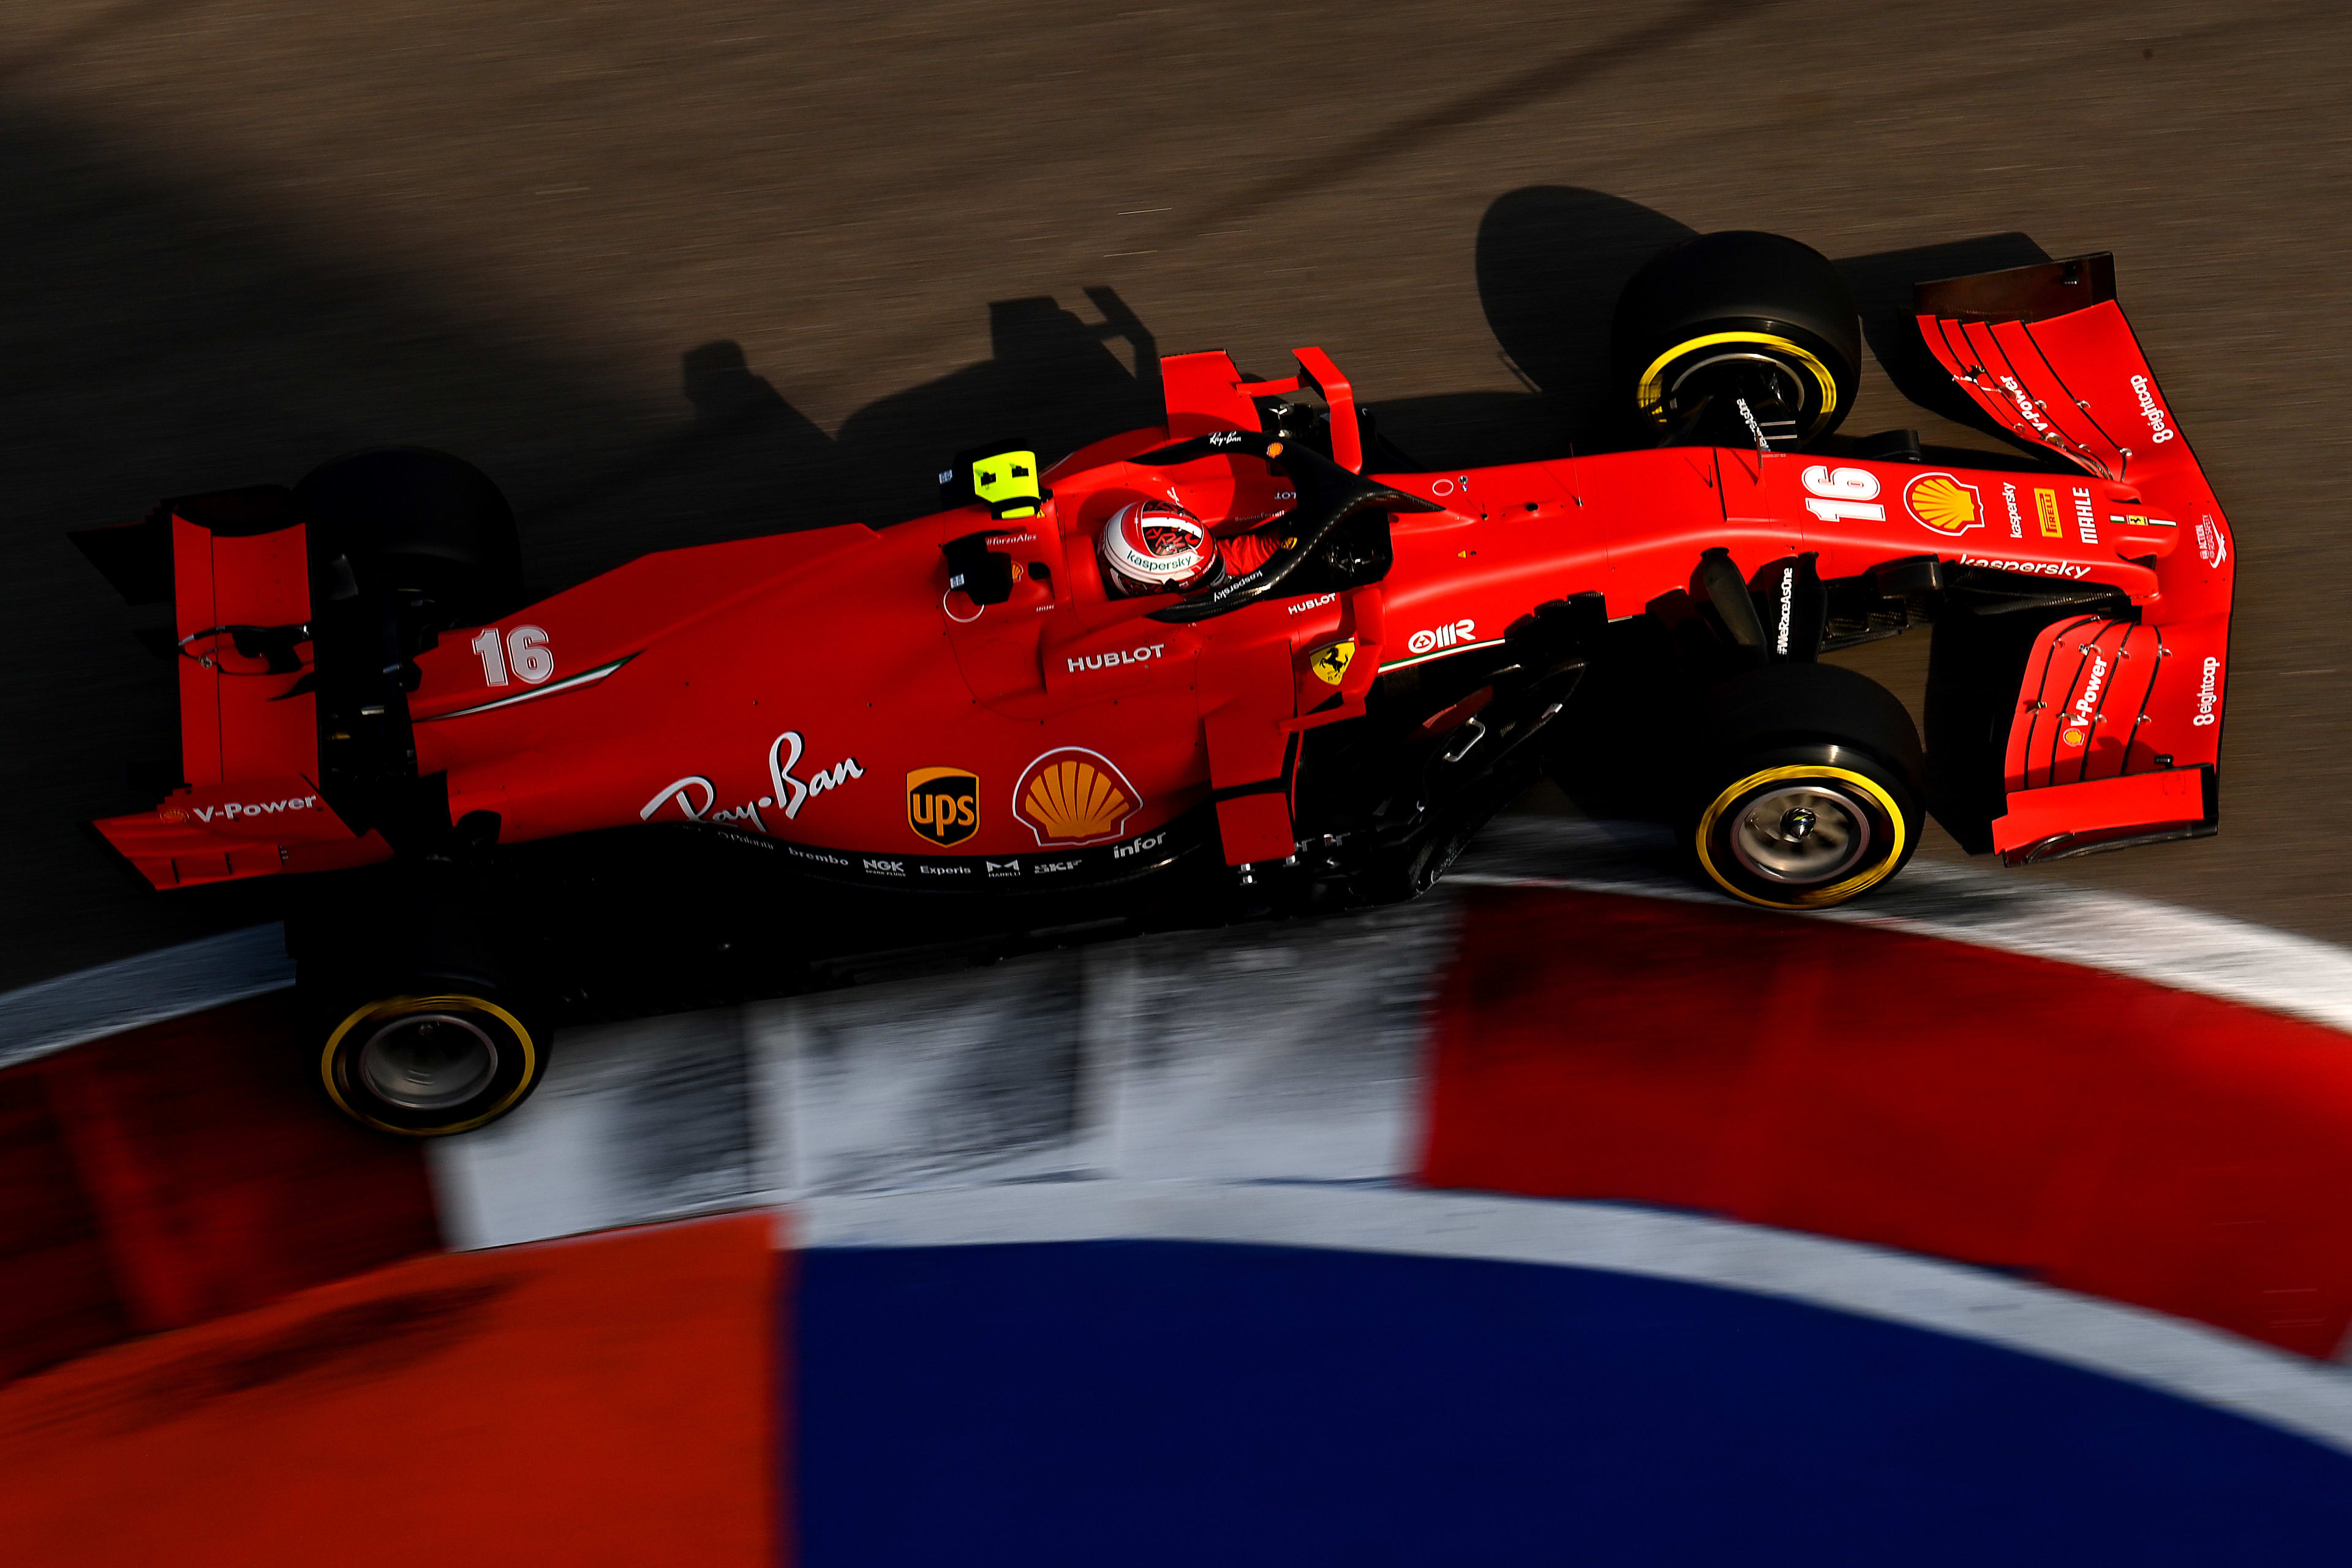 The knocks keep coming at Ferrari but Charles Leclerc is learning fast, Formula One 2019